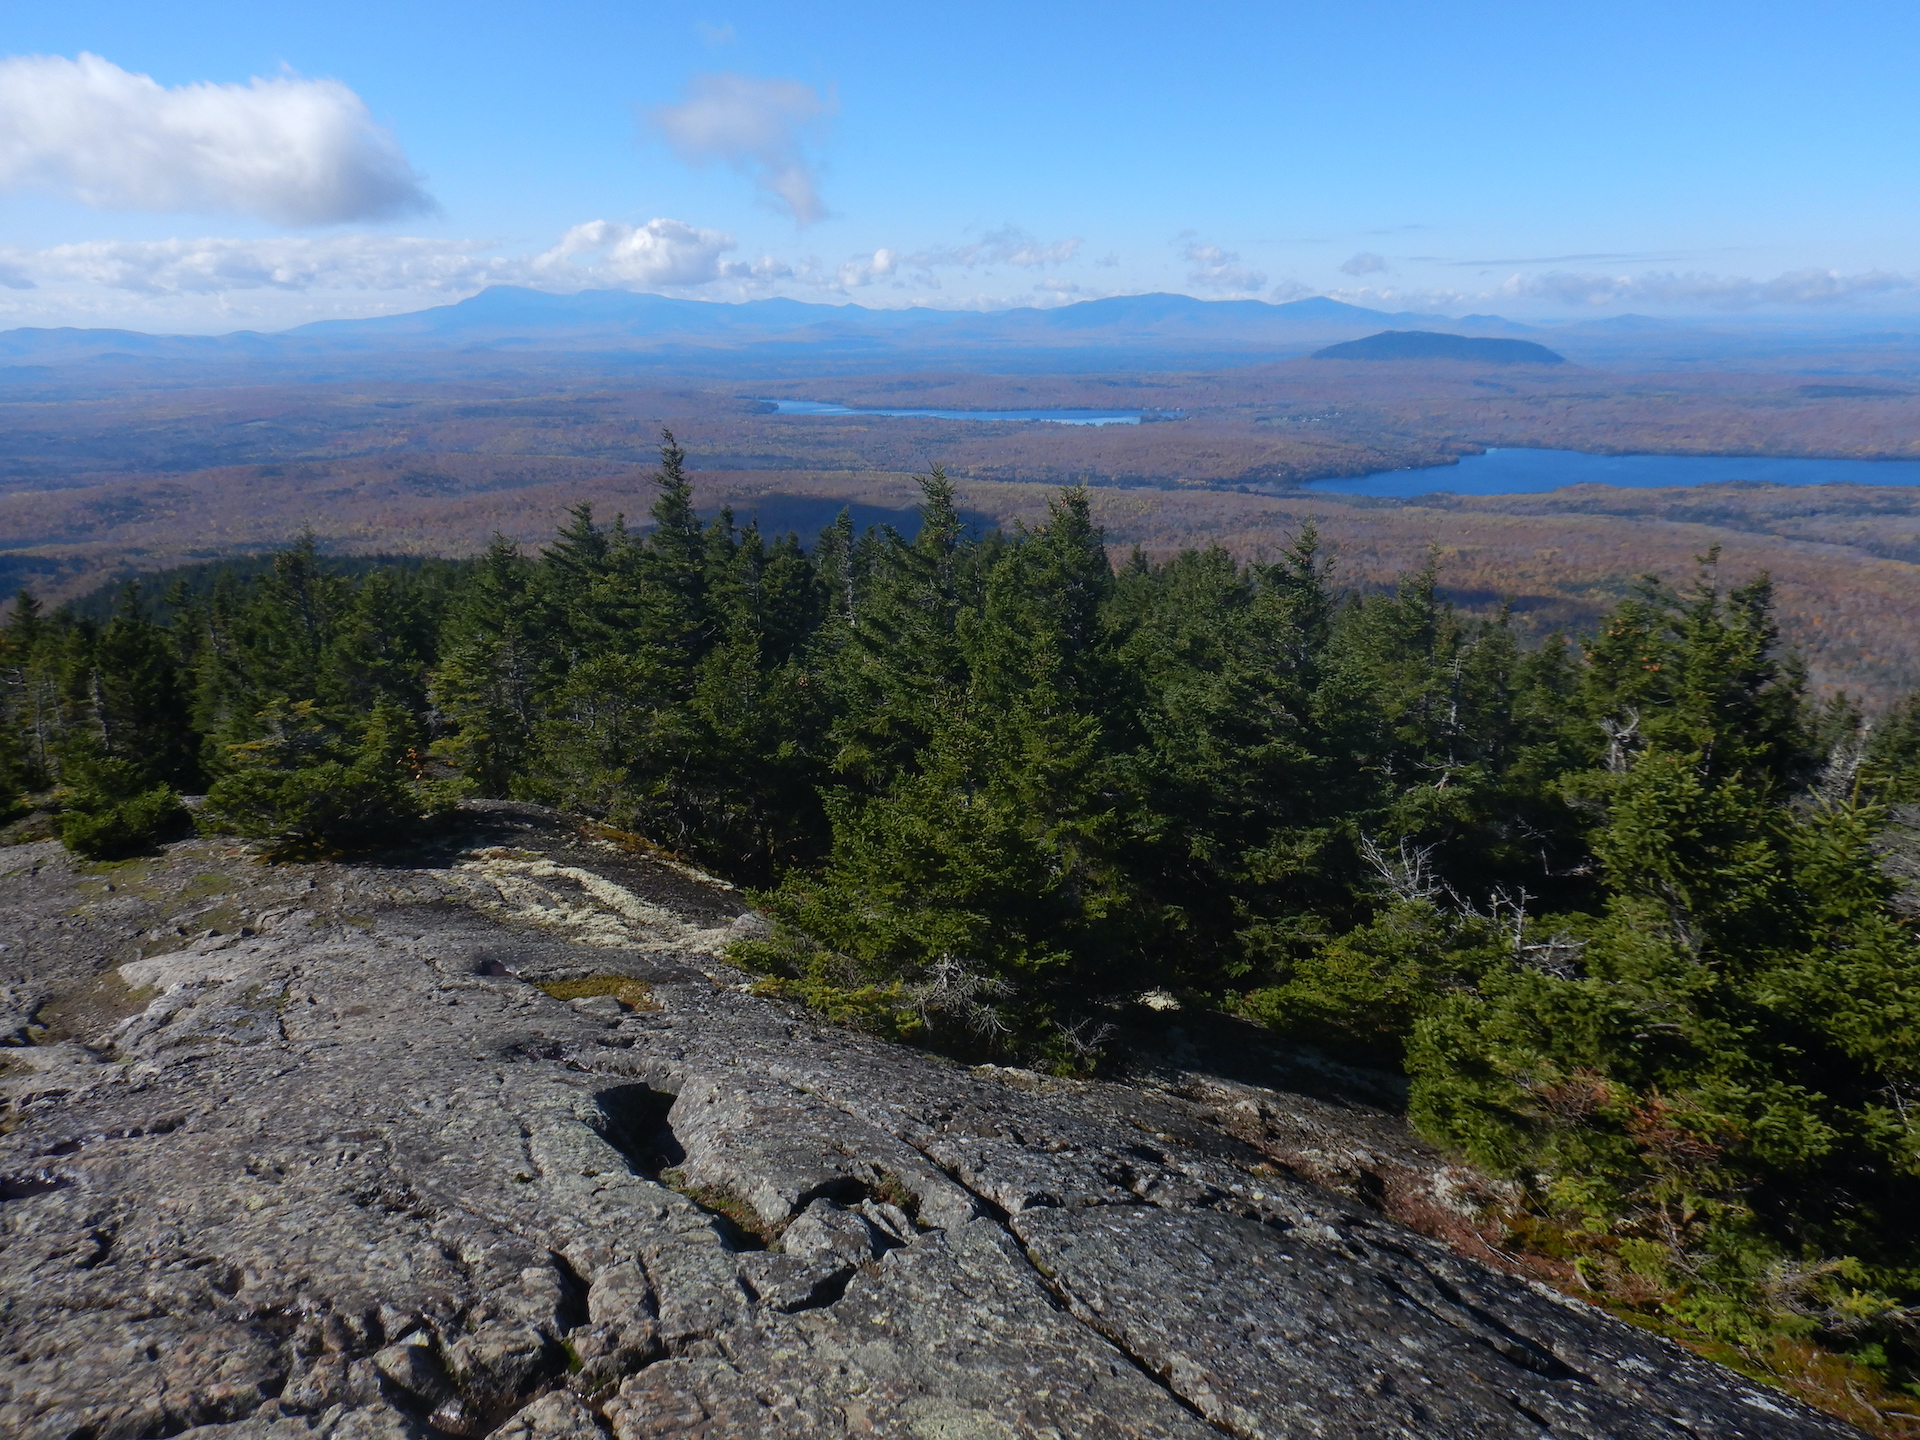 View of forested landscape from mountain summit. Bare rock covers the ground at bottom while spruce and fir trees cover the upper slopes. The lowland forest is mostly brown and bare of leaves. Tall mountains form the horizon although they look small due to the perspective. A pond is visible in the forest at center right.